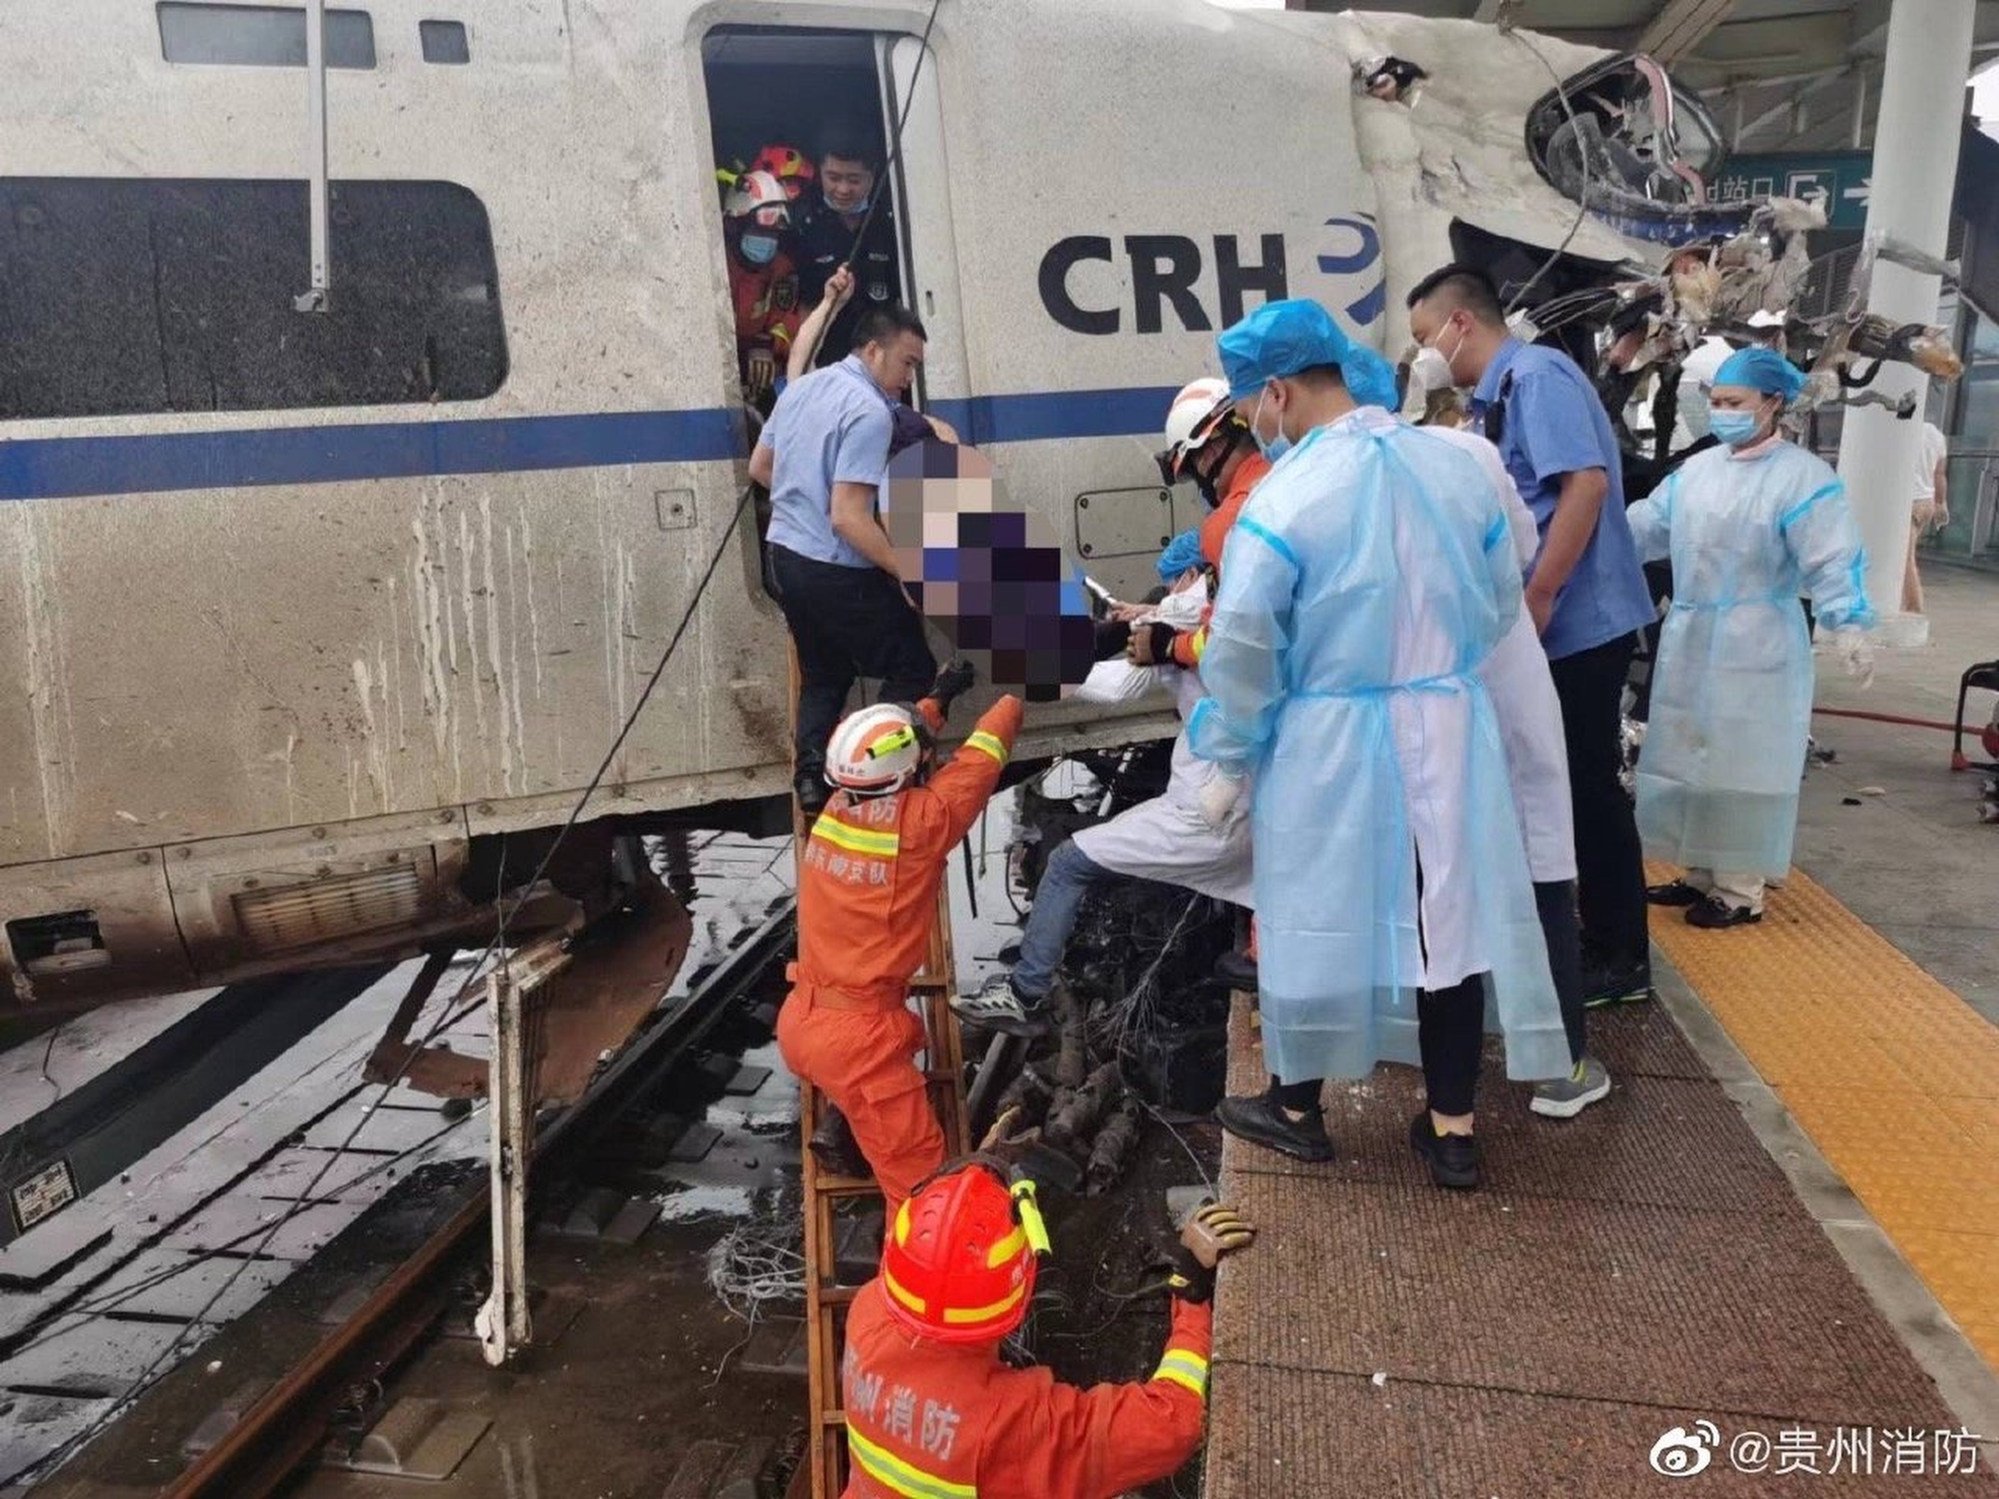 Emergency workers attend the scene at Rongjiang railway station in Guizhou province. Photo: Weibo